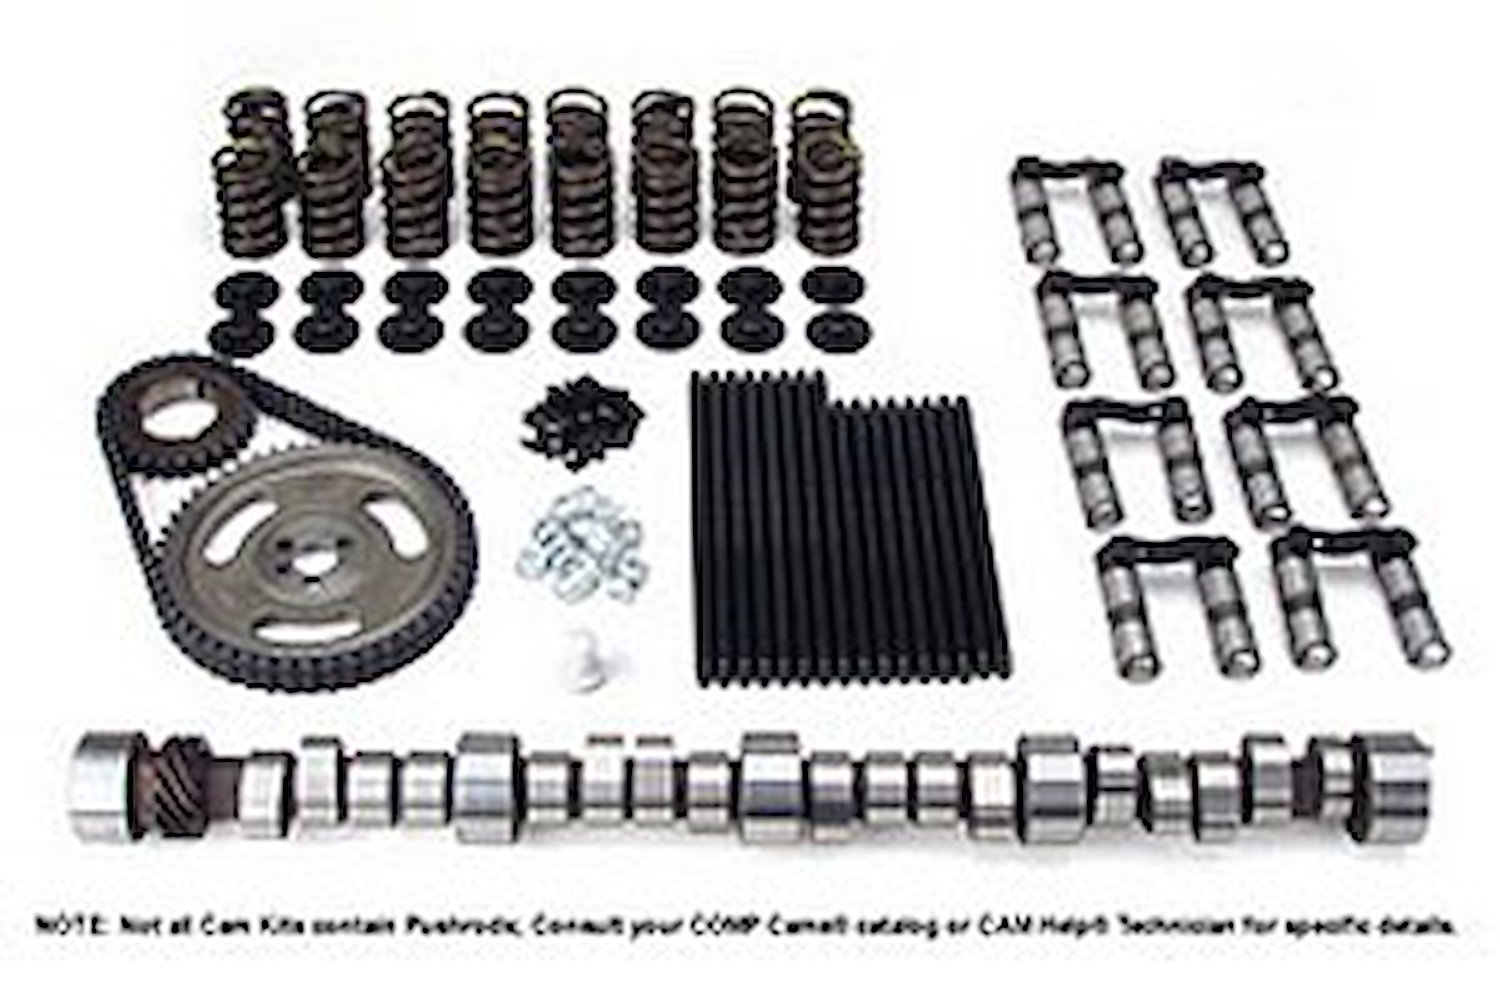 Magnum Hydraulic Roller Camshaft Complete Kit Chevy Big Block 396-454 Retro Fit Lift: .510"/.510"